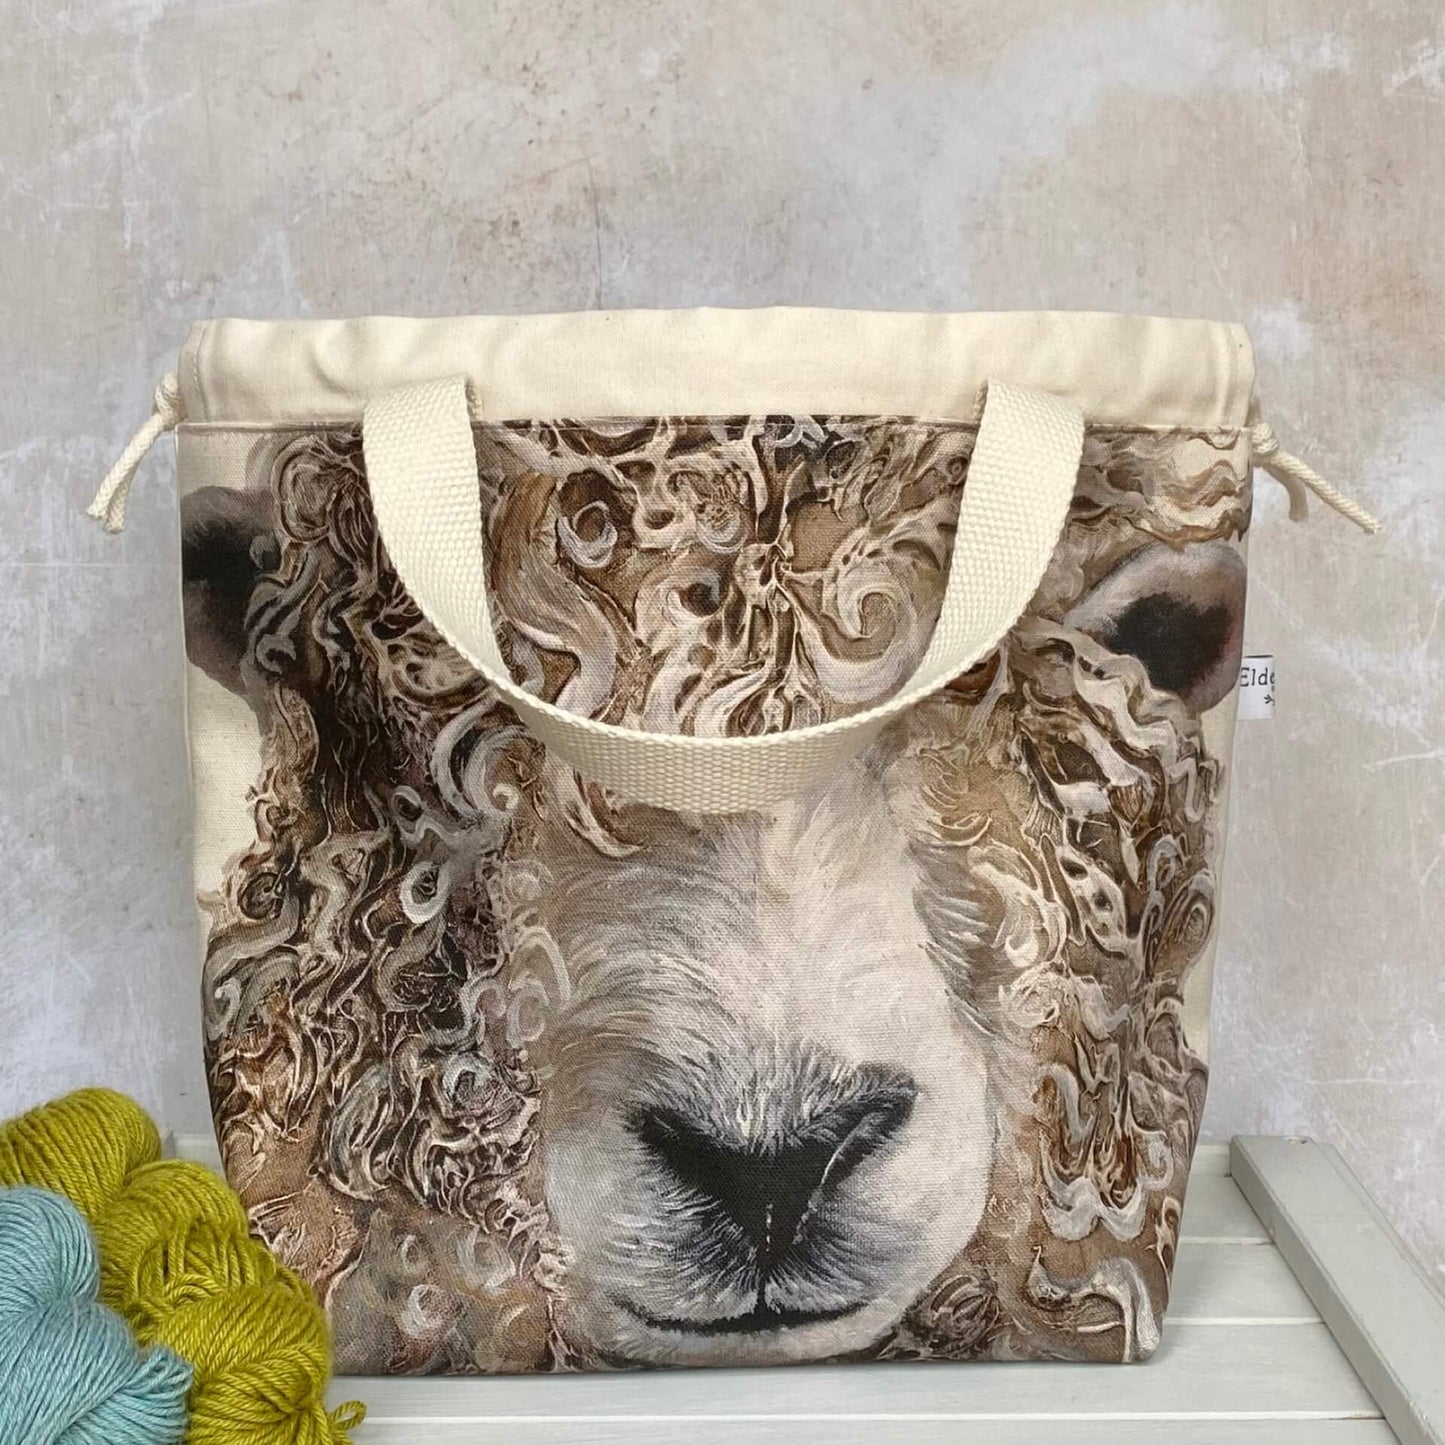 A knitting project bag featuring a large sheep face print sits on a bench. Sturdy natural coloured handles hang down and there is a drawstring closure. 